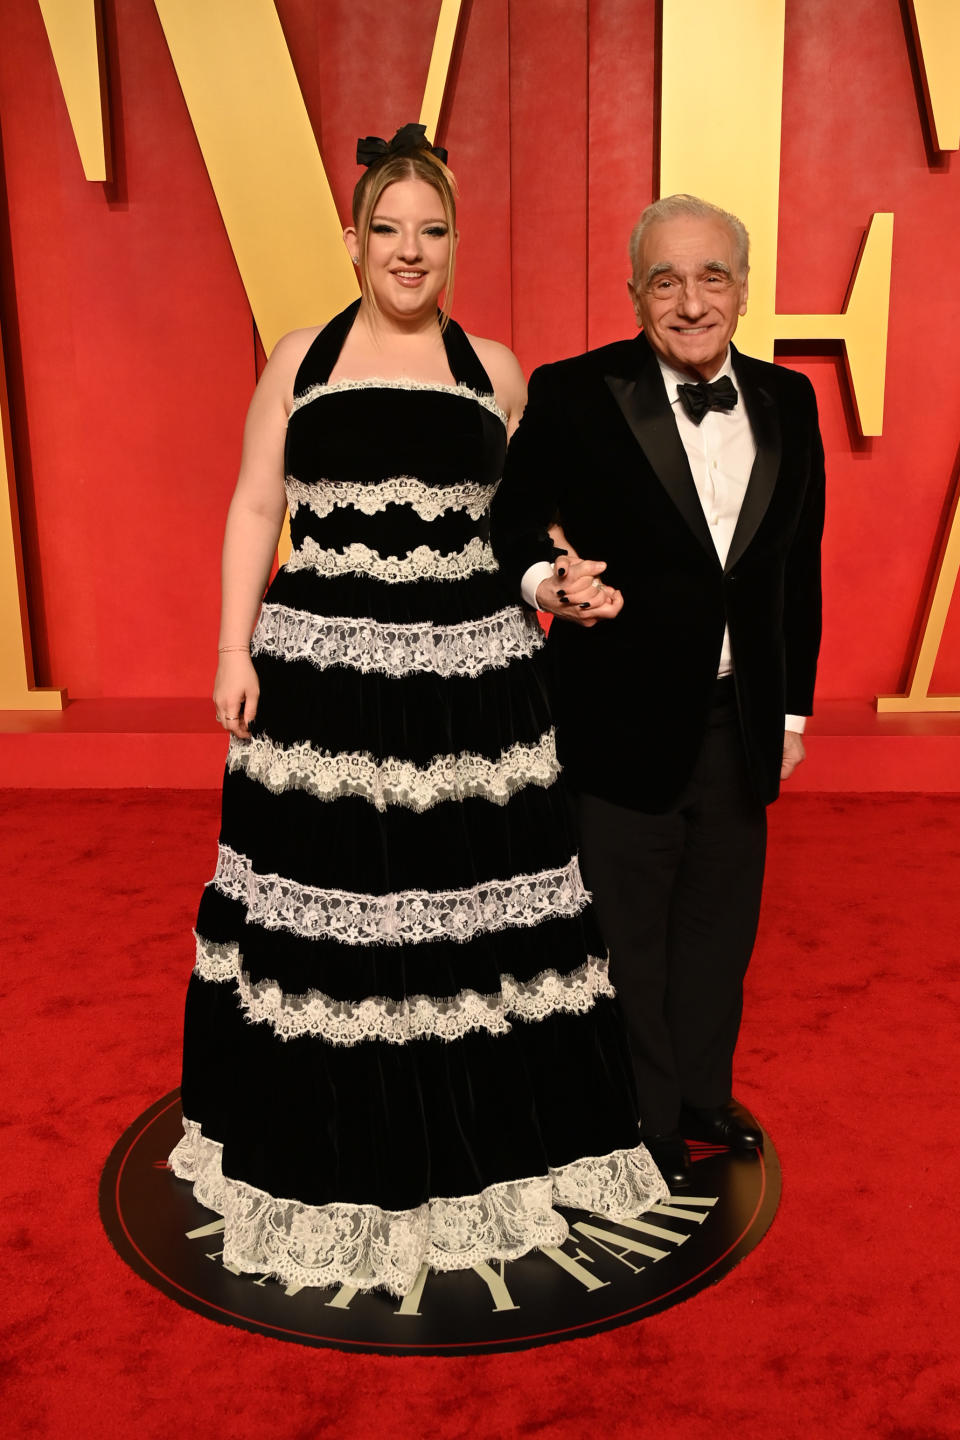 BEVERLY HILLS, CALIFORNIA - MARCH 10: (L-R) Francesca Scorsese and Martin Scorsese attend the 2024 Vanity Fair Oscar Party Hosted By Radhika Jones at Wallis Annenberg Center for the Performing Arts on March 10, 2024 in Beverly Hills, California. (Photo by Jon Kopaloff/Getty Images for Vanity Fair)